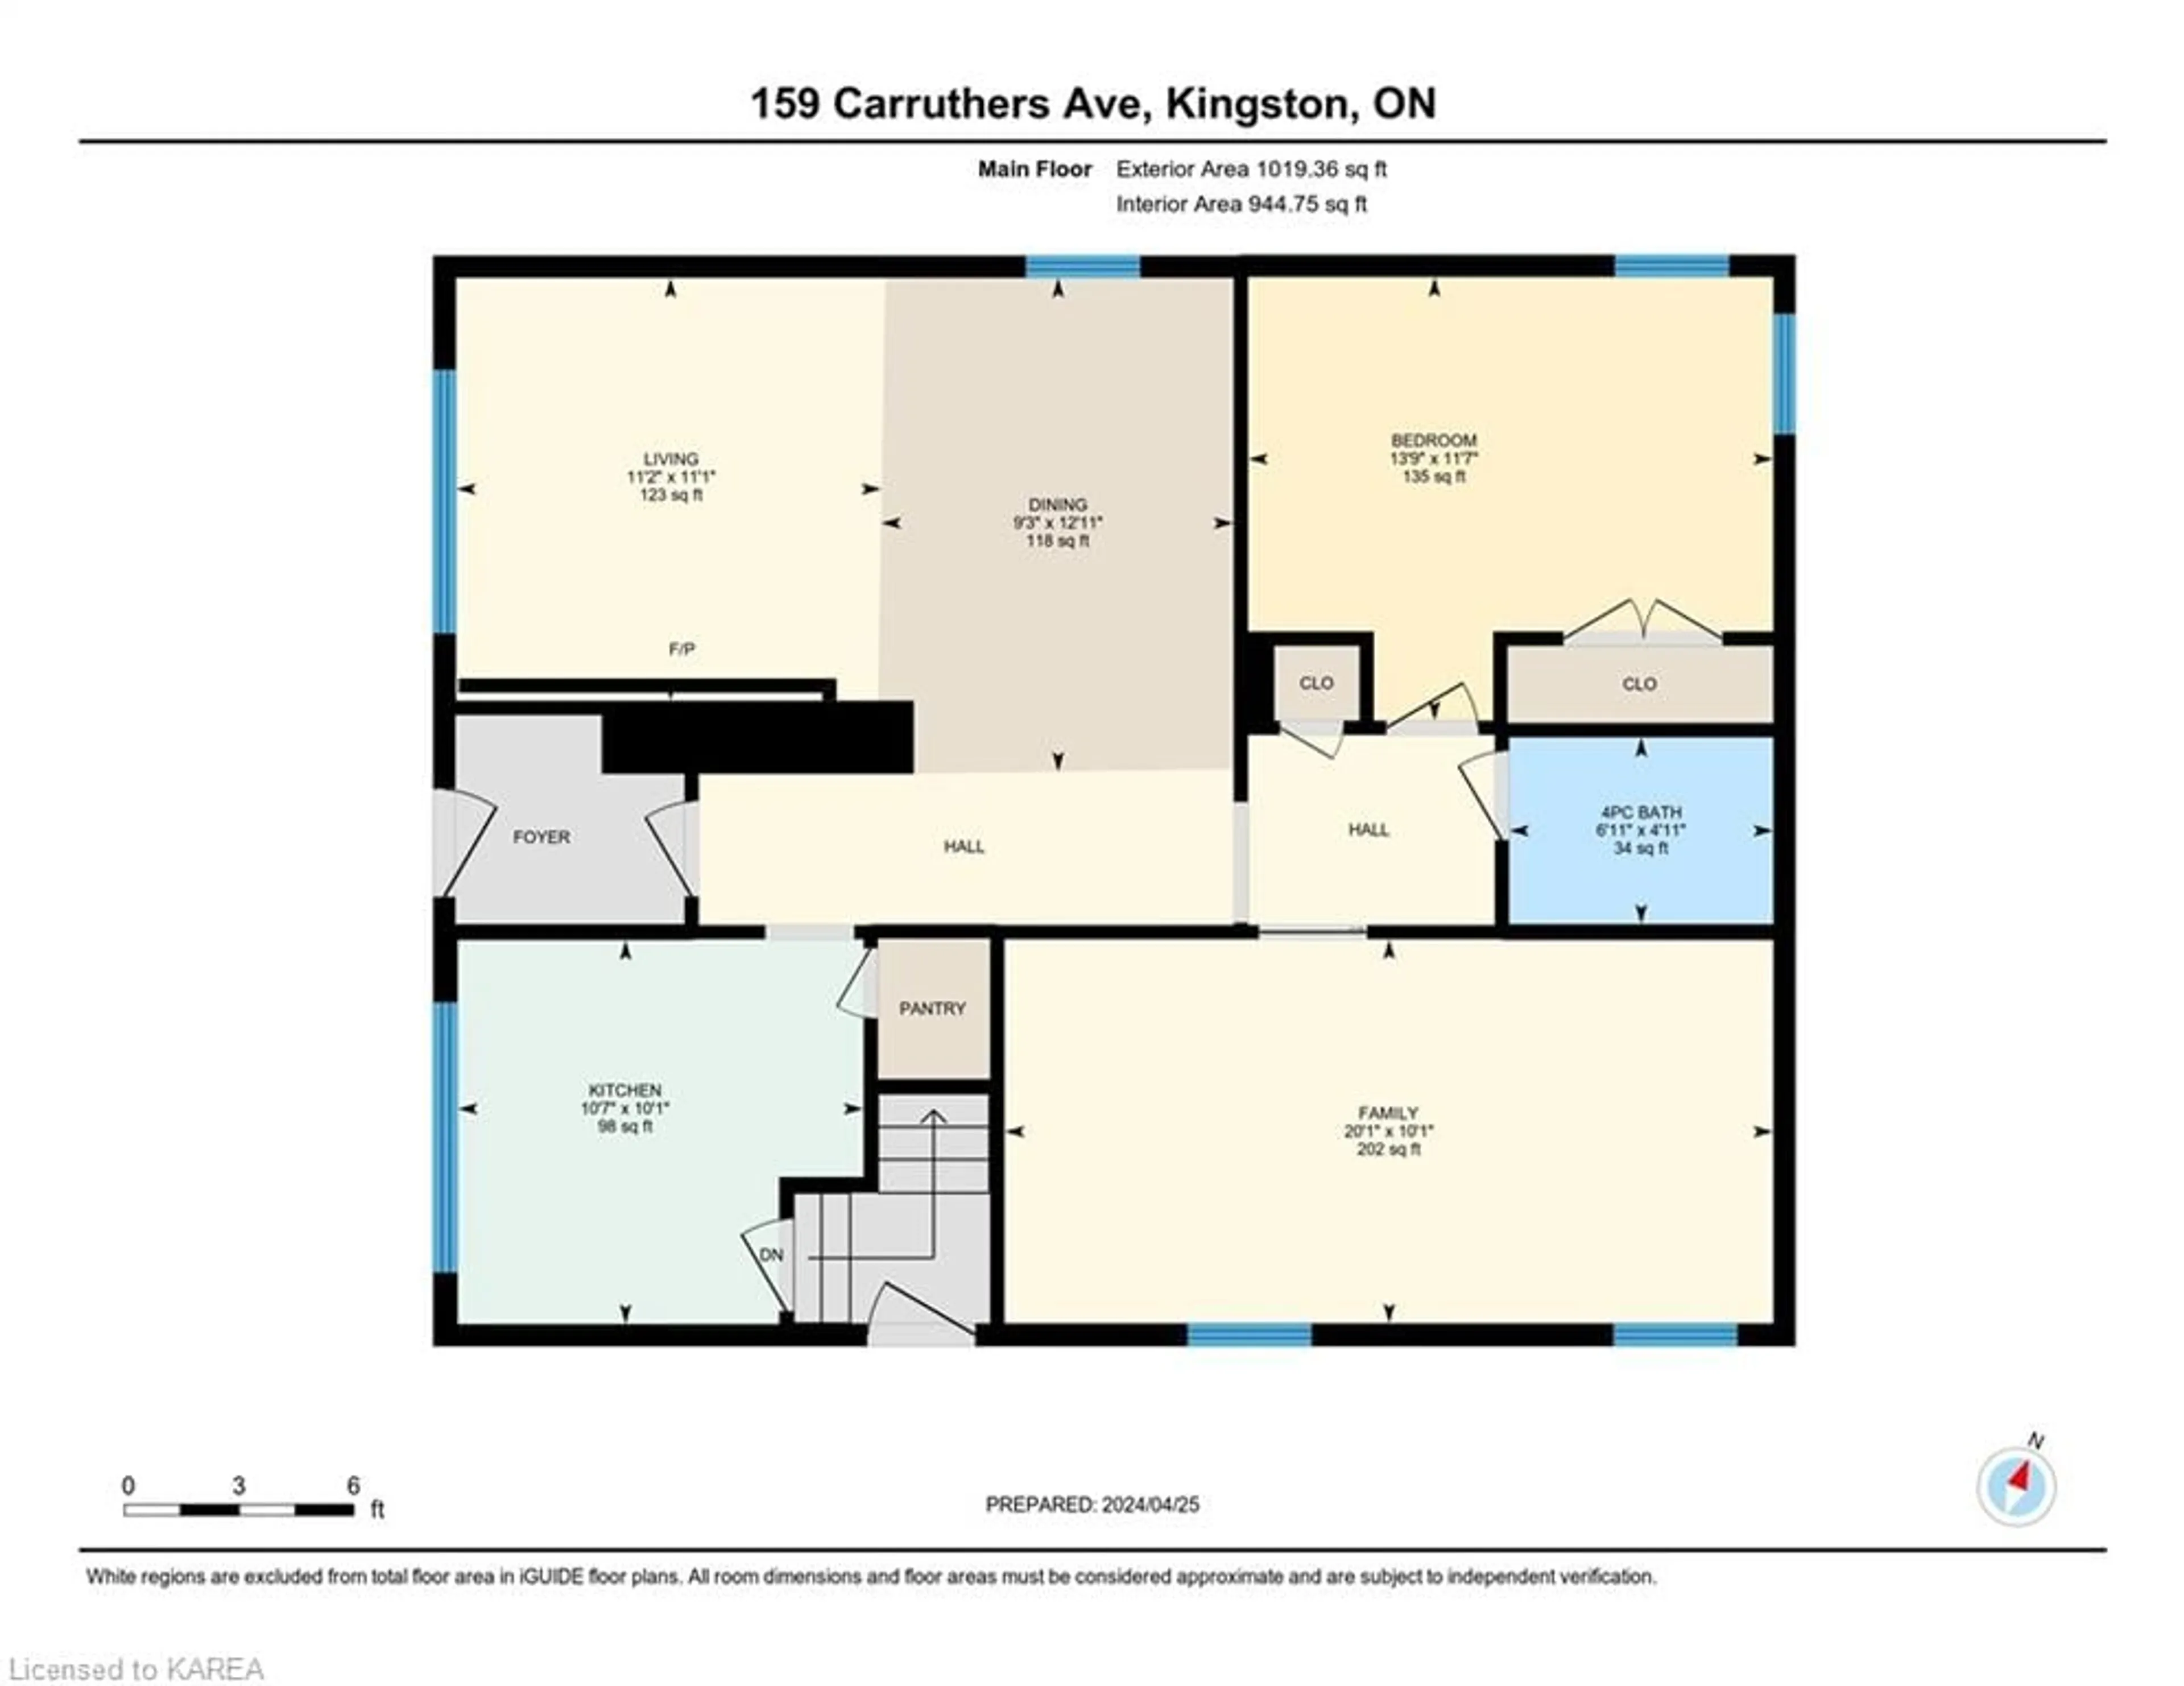 Floor plan for 159 Carruthers Ave, Kingston Ontario K7L 1M8